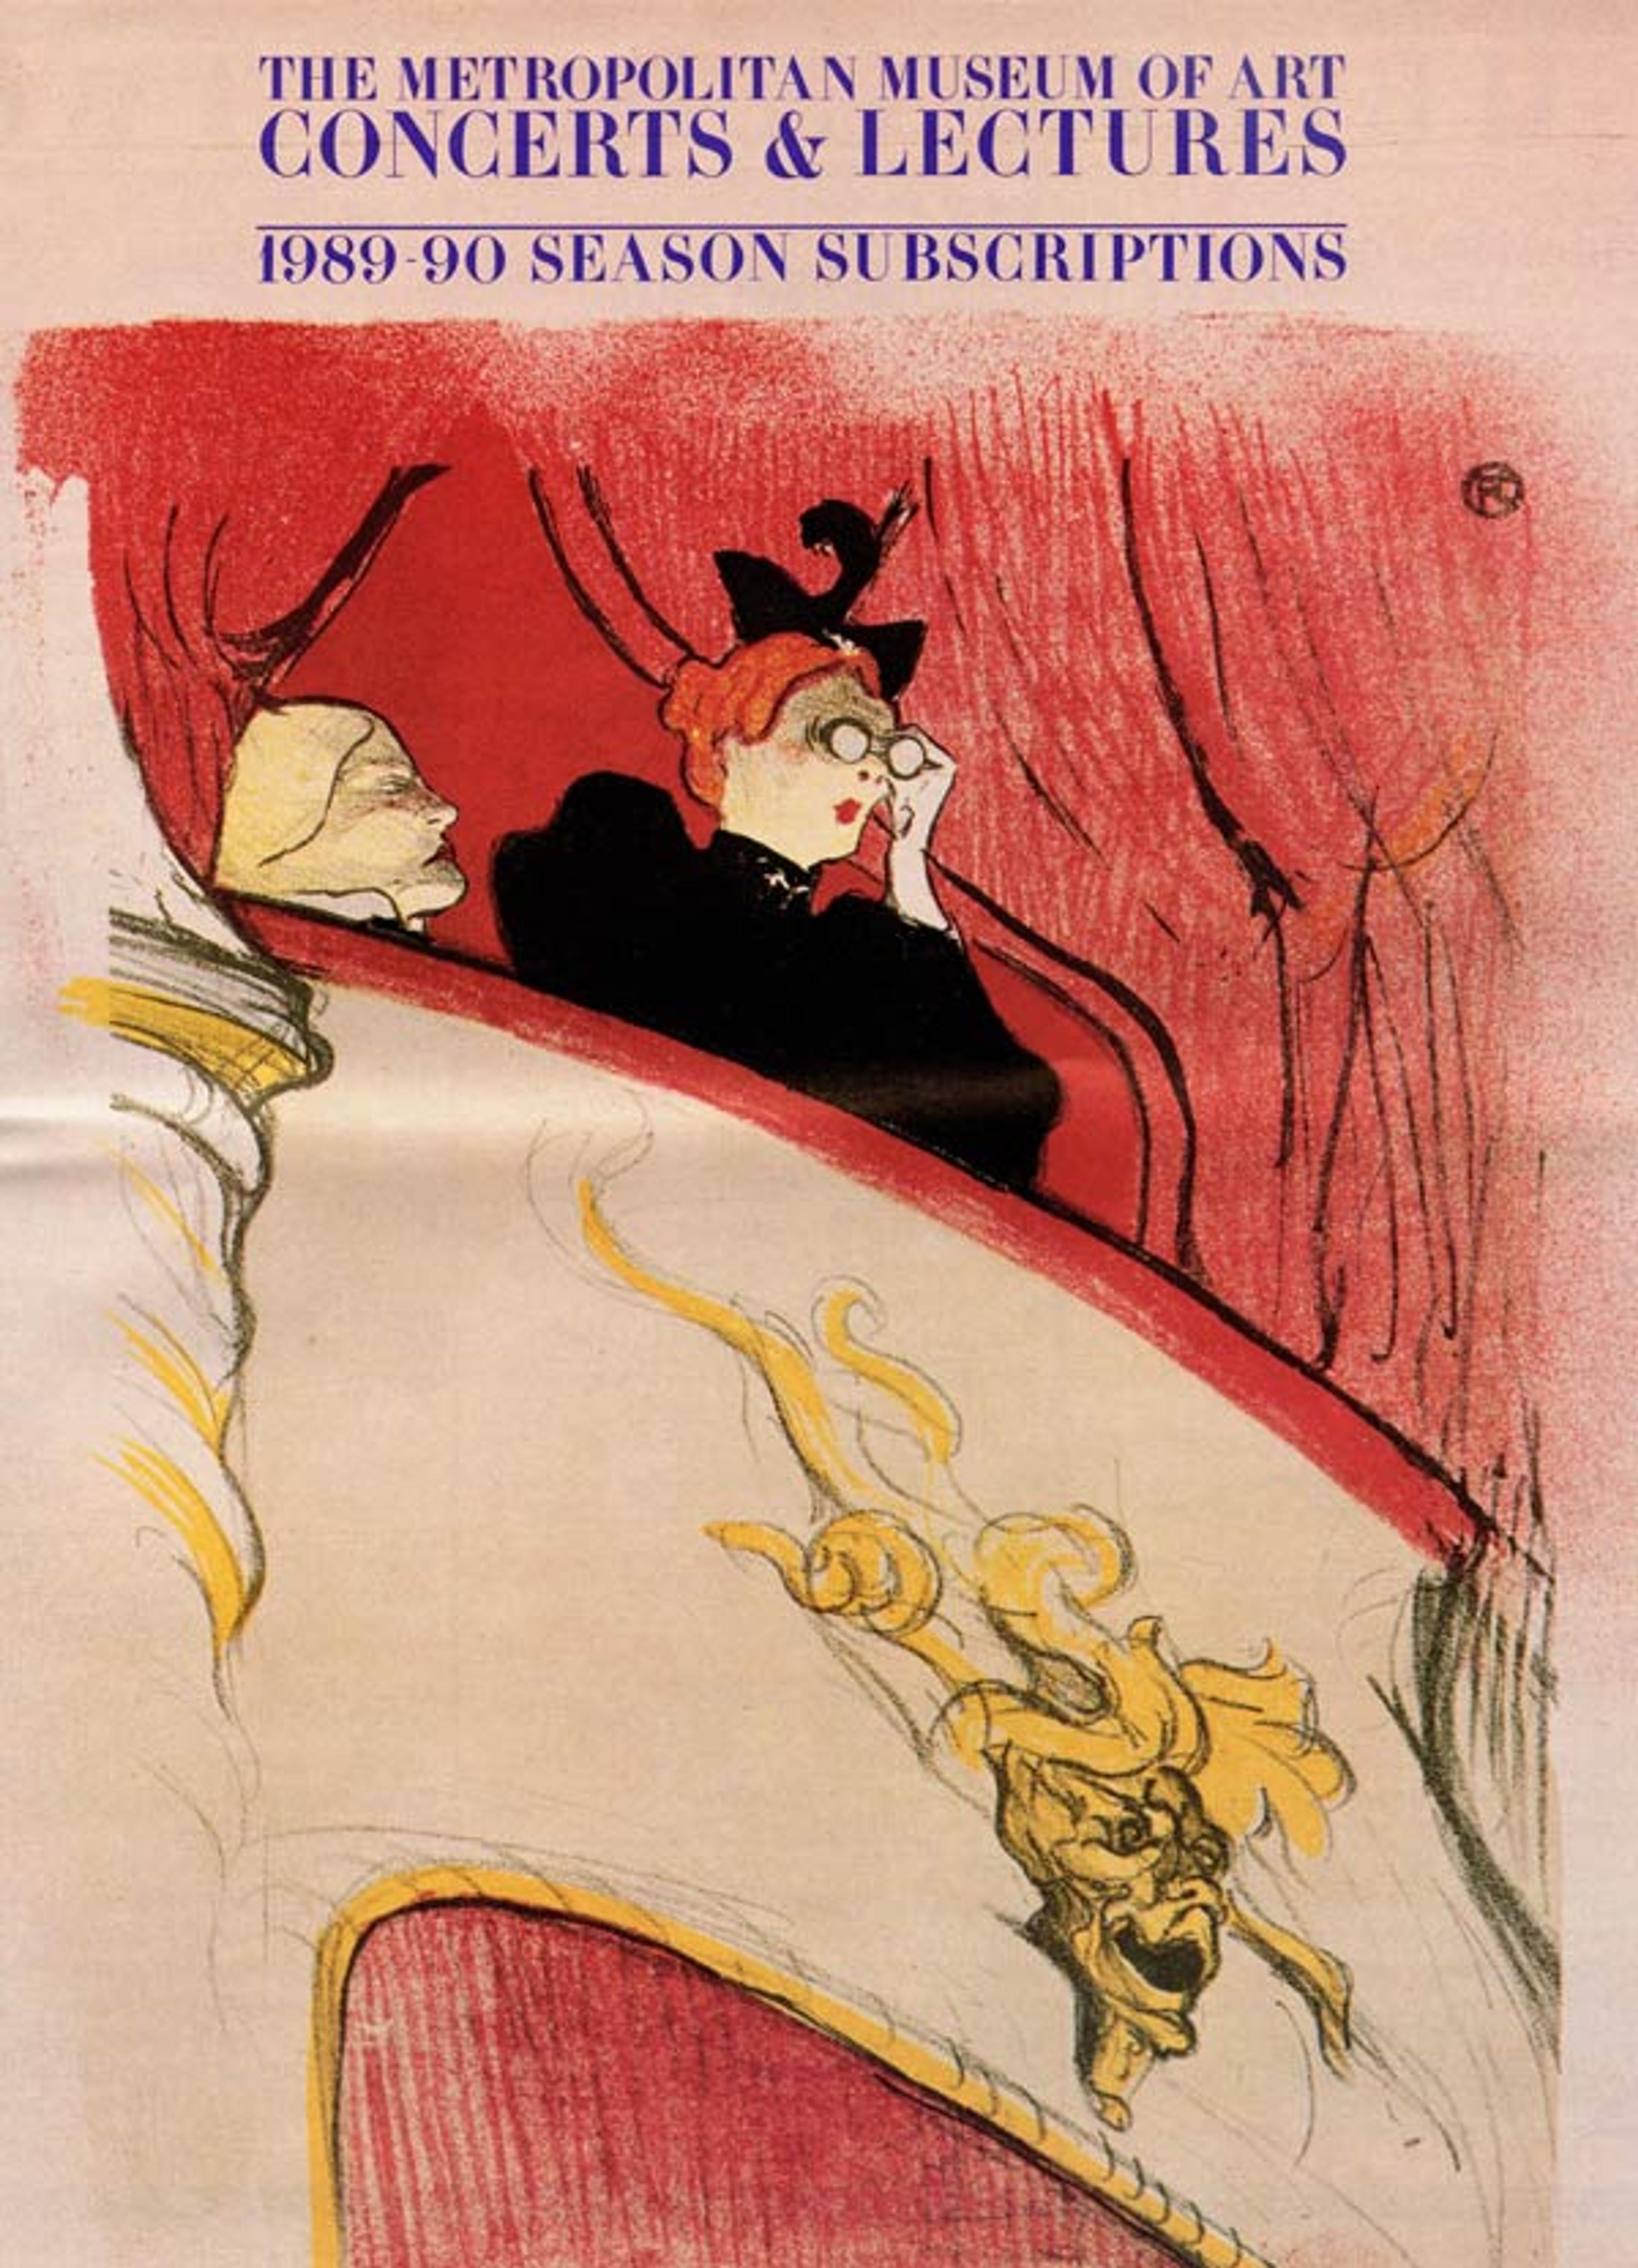 Brochure cover for the 1989–90 season of Concerts & Lectures, featuring Henri de Toulouse-Lautrec's The Box with the Gilded Mask